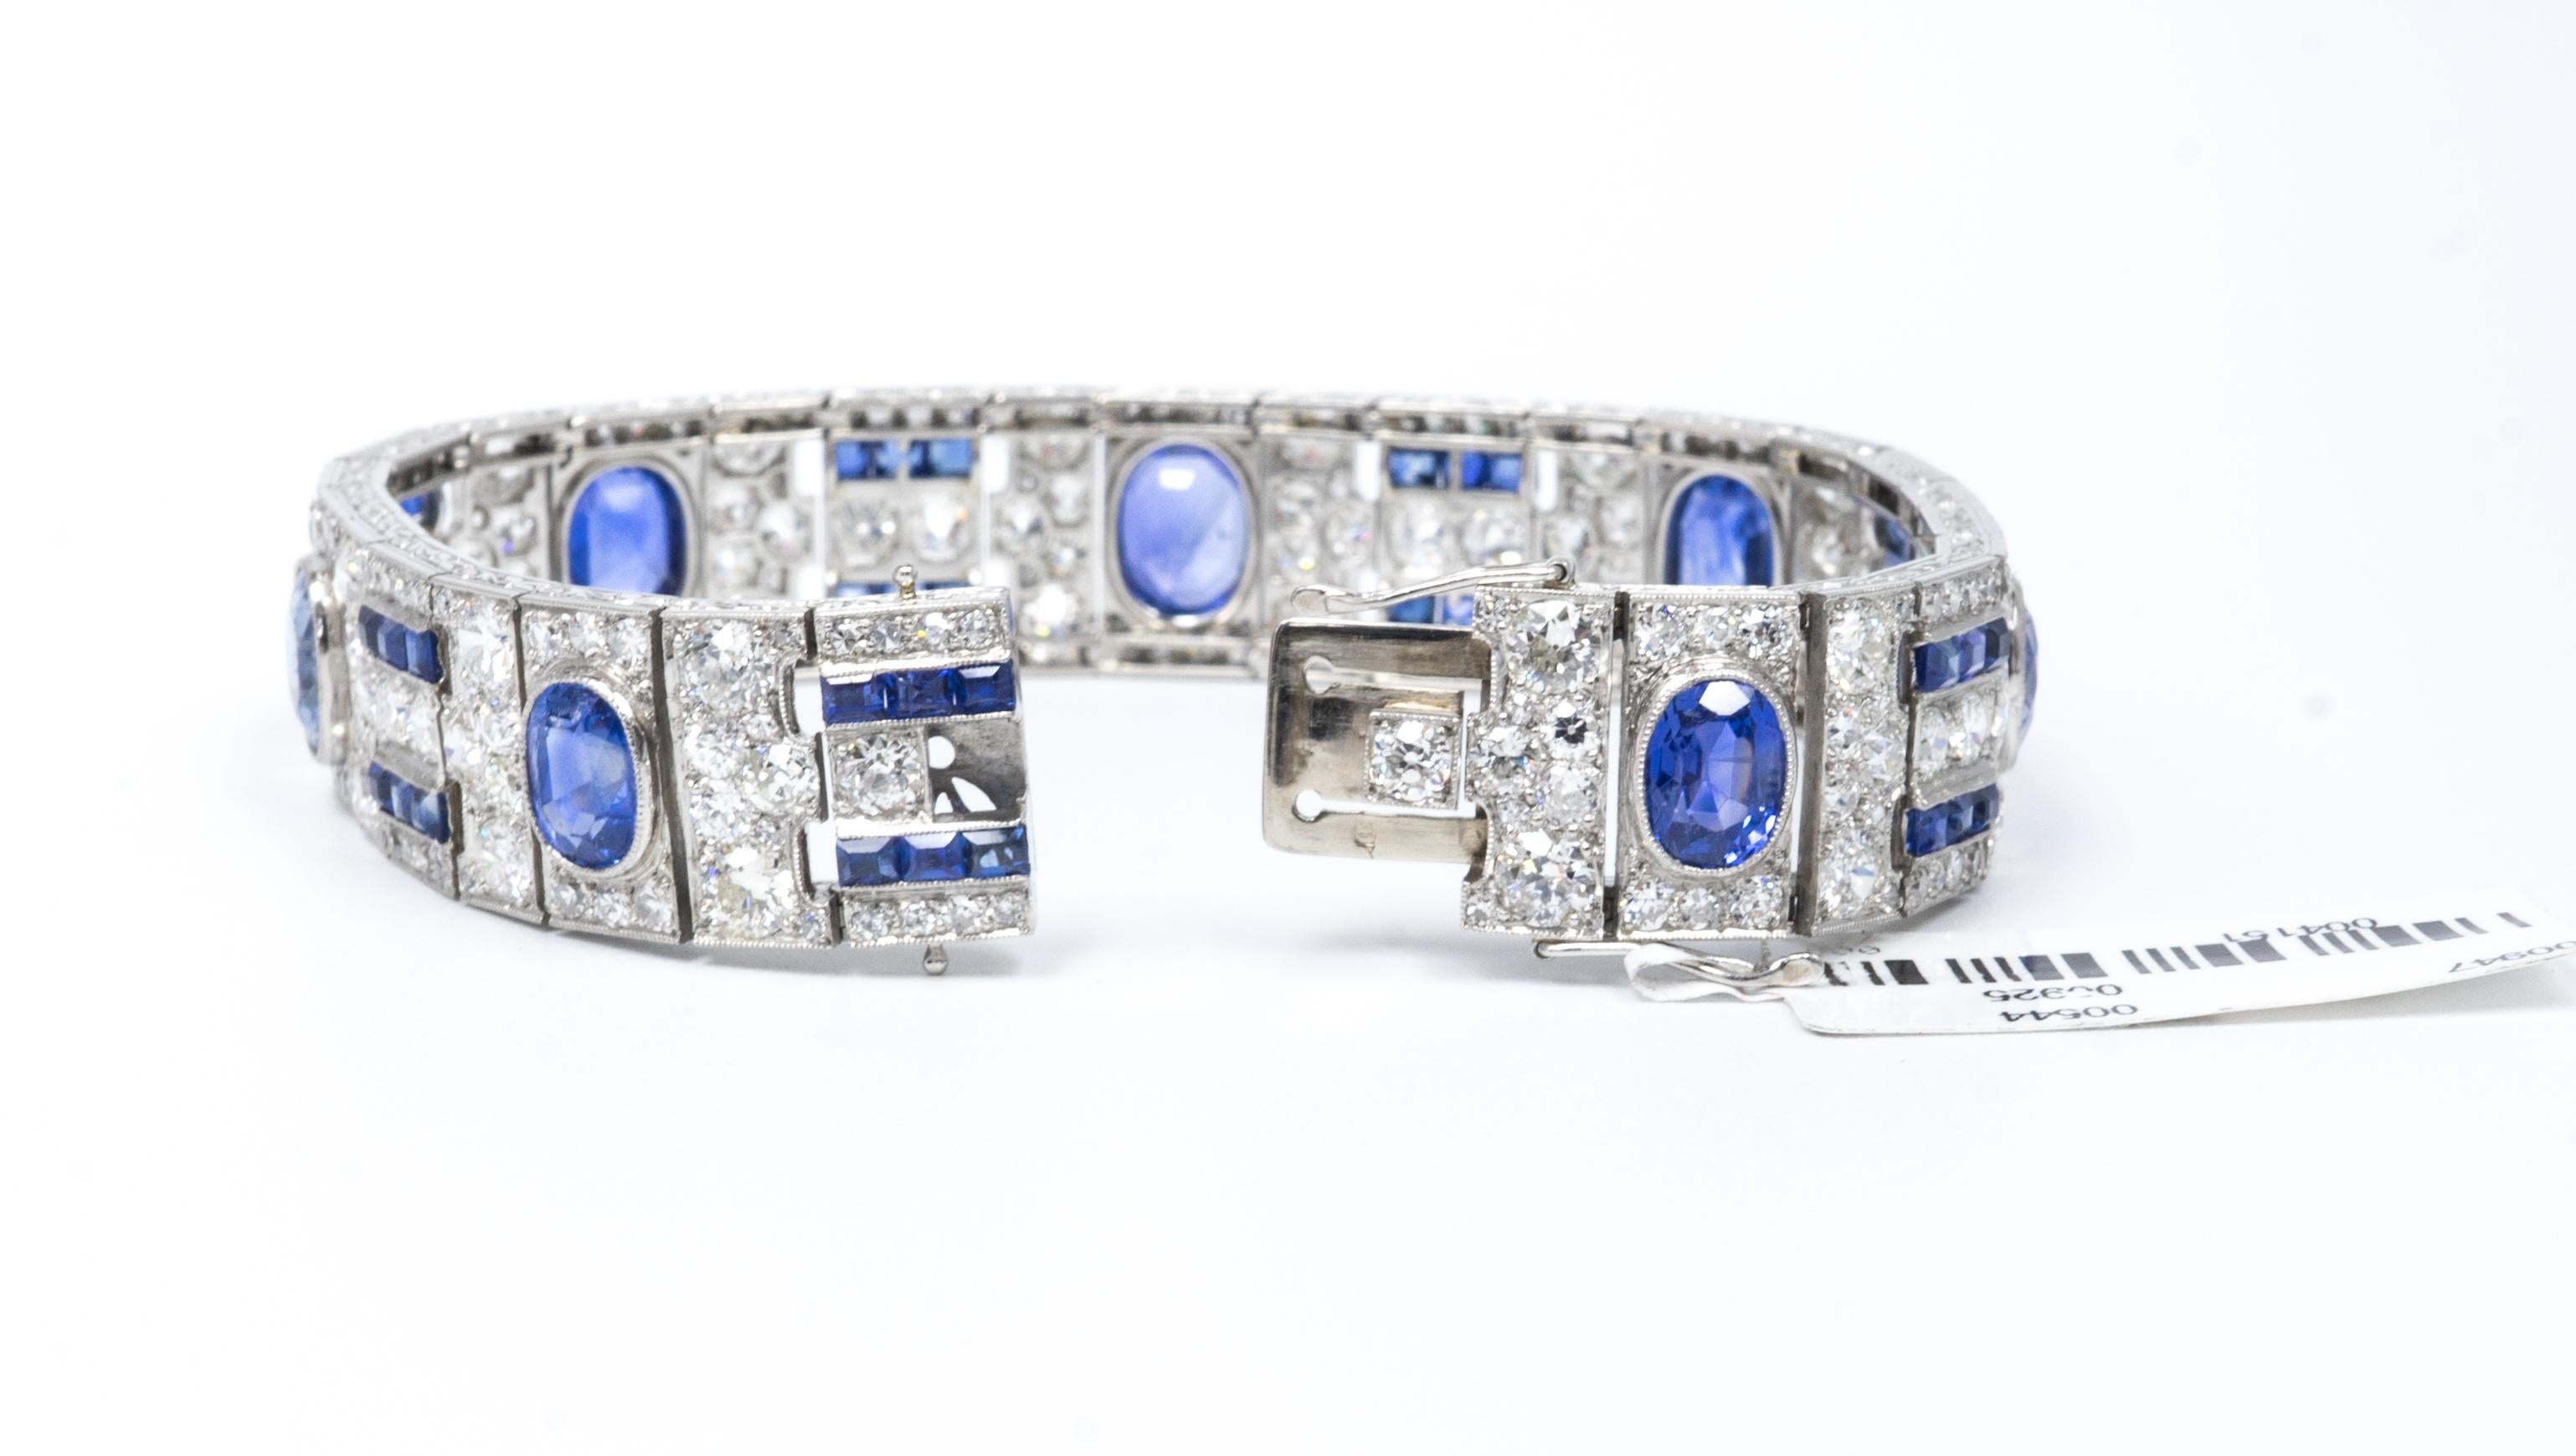 A Sapphire and diamond Art Deco Style Platinum Bracelet with approximately 18.50 carats of diamonds ( 238 diamonds) and 7 sapphires weighing approximately 20.0 carats total with an additional 42 sapphires weighing approximately 6.00 carats, set in